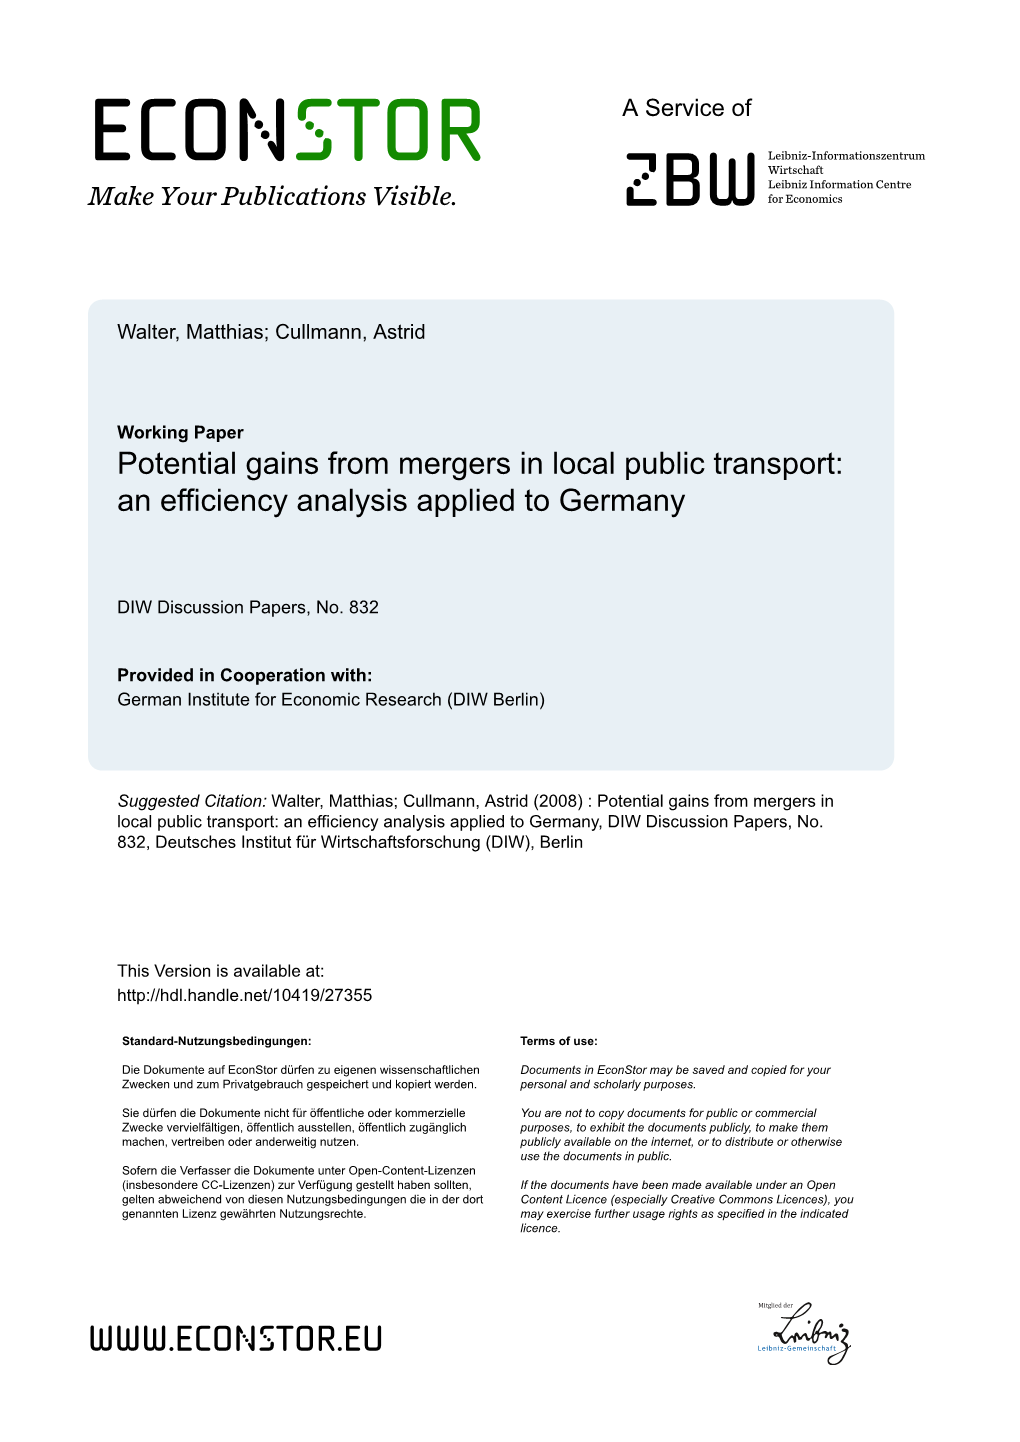 Potential Gains from Mergers in Local Public Transport – an Efficiency Analysis Applied to Germany